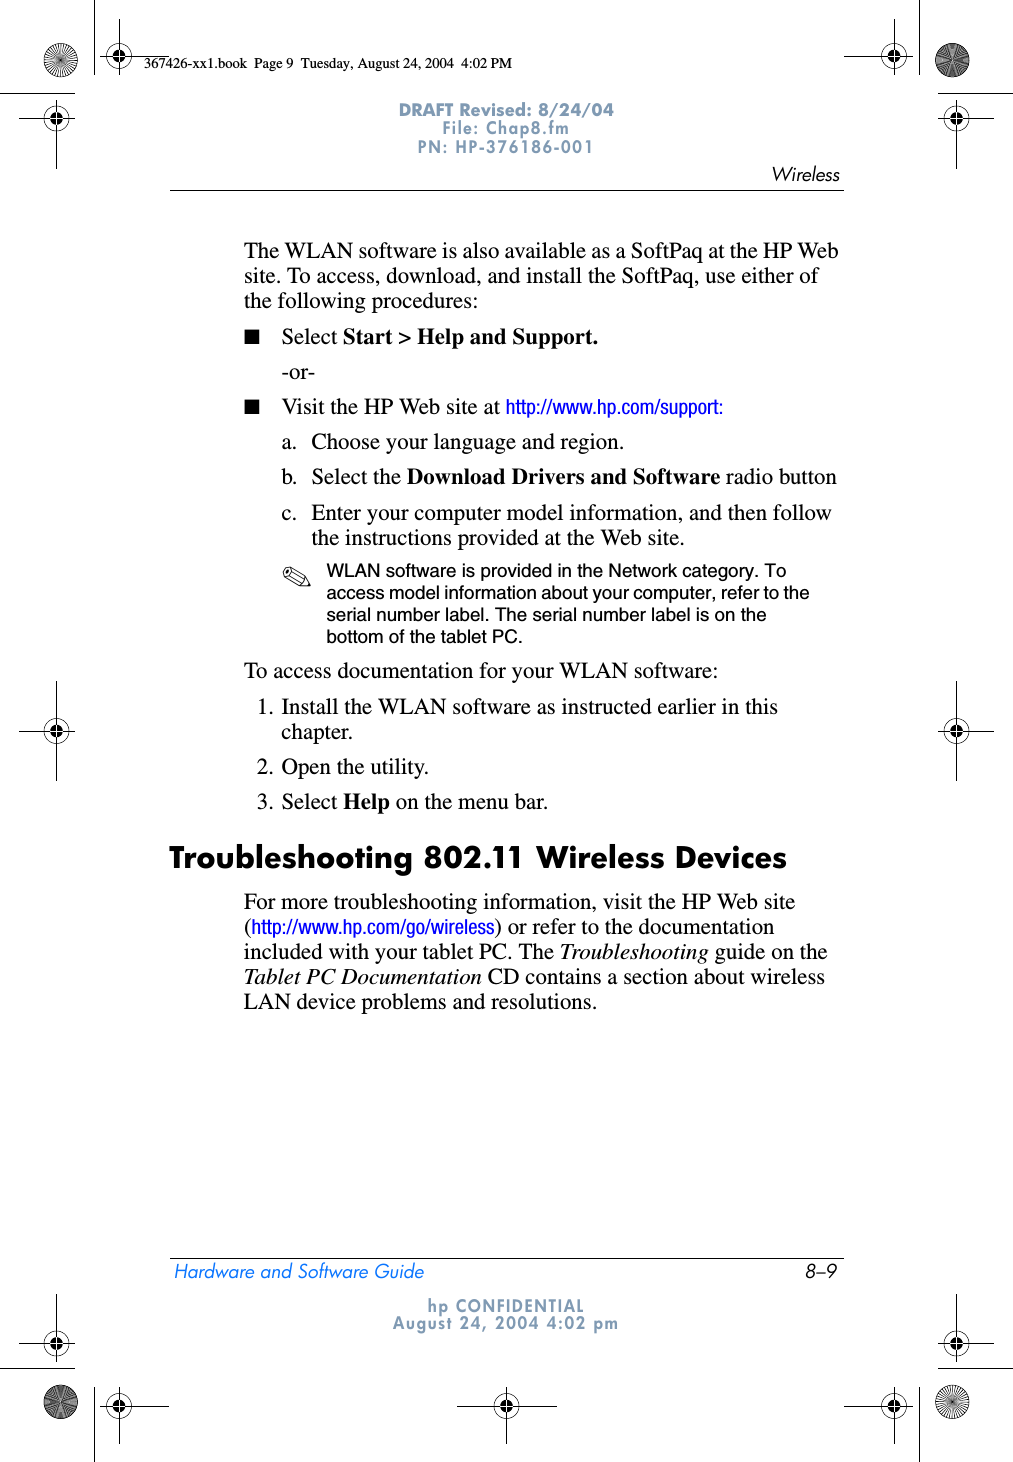 WirelessHardware and Software Guide 8–9DRAFT Revised: 8/24/04File: Chap8.fm PN: HP-376186-001 hp CONFIDENTIALAugust 24, 2004 4:02 pmThe WLAN software is also available as a SoftPaq at the HP Web site. To access, download, and install the SoftPaq, use either of the following procedures:■Select Start &gt; Help and Support.-or-■Visit the HP Web site at http://www.hp.com/support:a. Choose your language and region.b. Select the Download Drivers and Software radio buttonc. Enter your computer model information, and then follow the instructions provided at the Web site. ✎WLAN software is provided in the Network category. To access model information about your computer, refer to the serial number label. The serial number label is on the bottom of the tablet PC.To access documentation for your WLAN software:1. Install the WLAN software as instructed earlier in this chapter.2. Open the utility.3. Select Help on the menu bar.Troubleshooting 802.11 Wireless DevicesFor more troubleshooting information, visit the HP Web site (http://www.hp.com/go/wireless) or refer to the documentation included with your tablet PC. The Troubleshooting guide on the Tablet PC Documentation CD contains a section about wireless LAN device problems and resolutions.367426-xx1.book  Page 9  Tuesday, August 24, 2004  4:02 PM